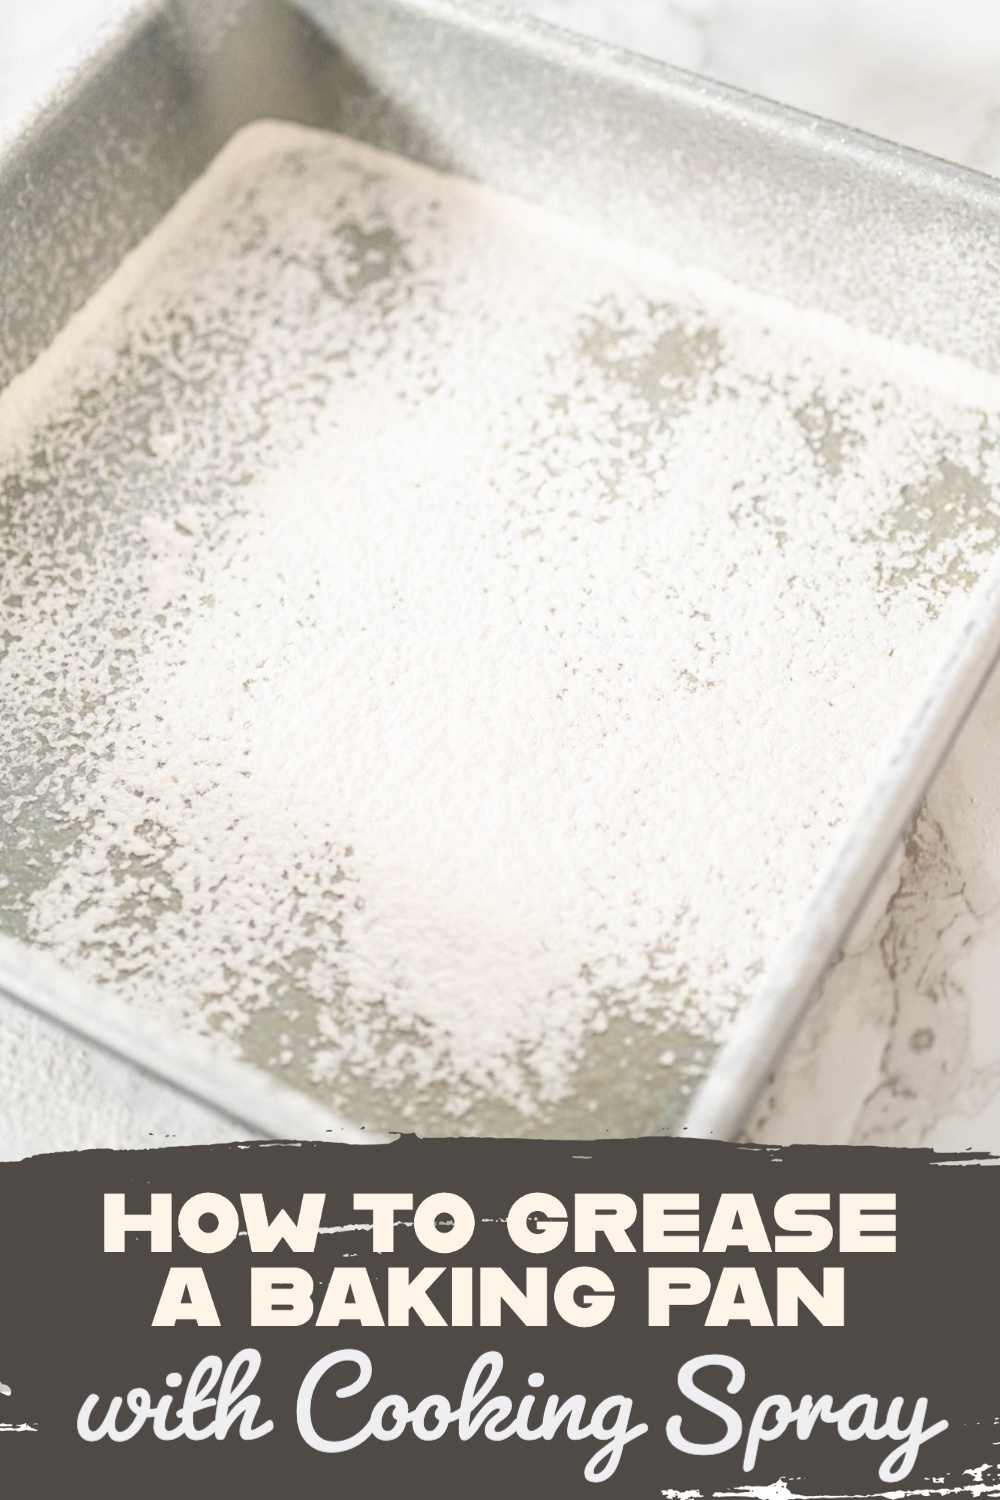 How to Grease a Baking Pan with Cooking Spray